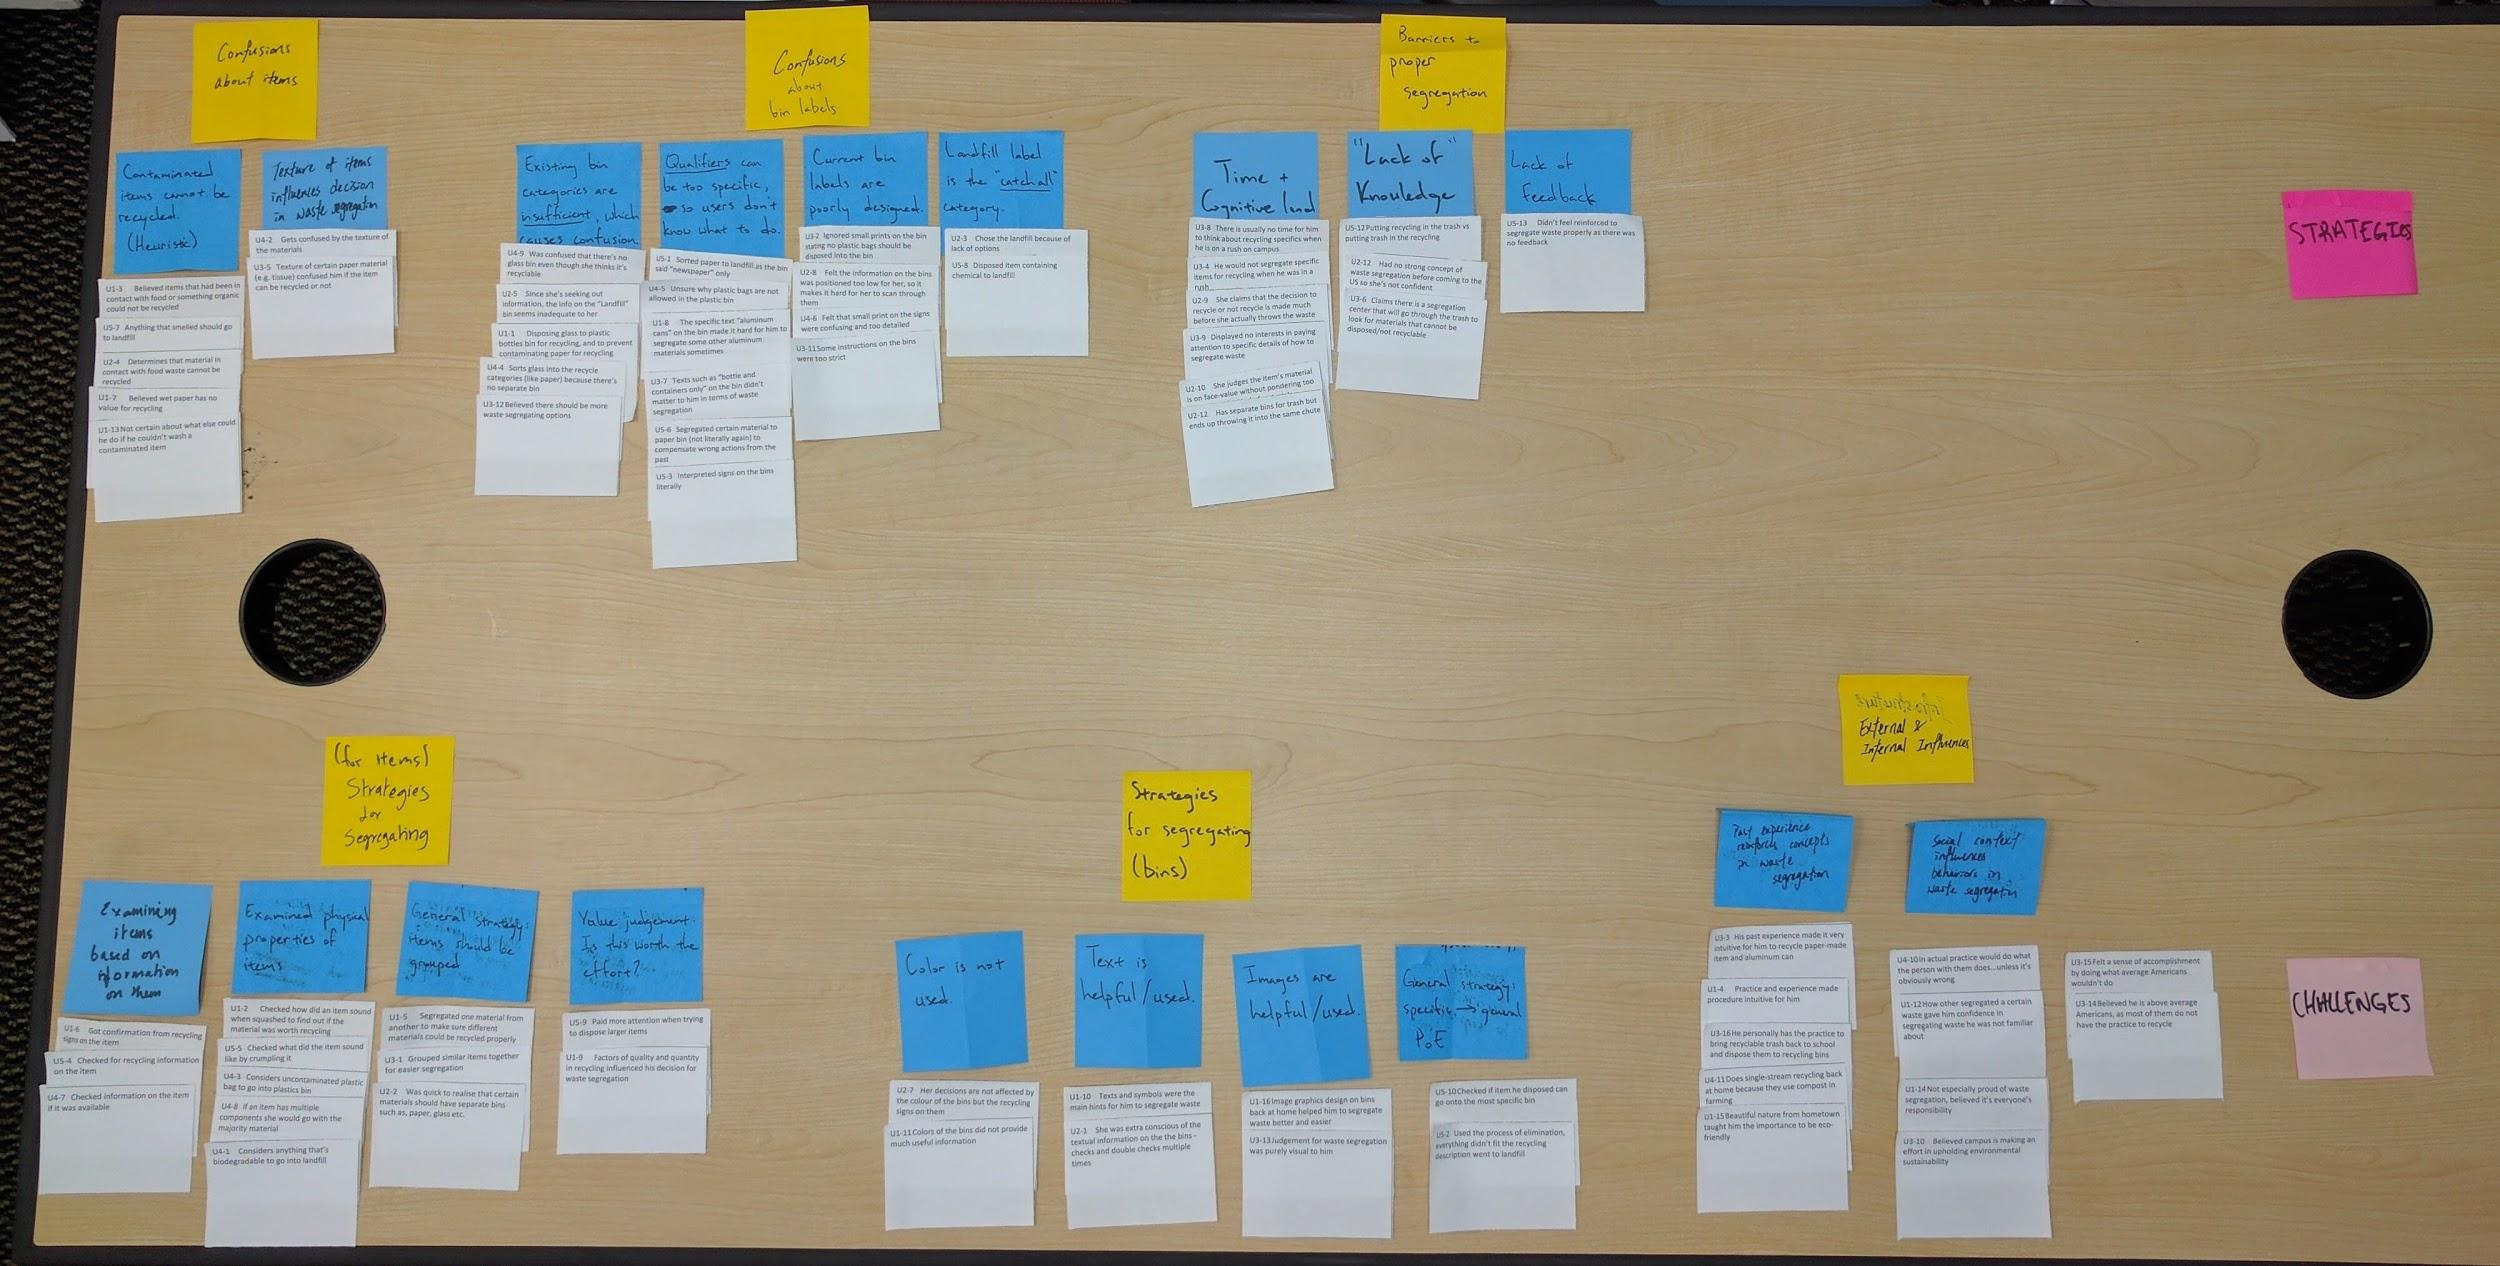 How we affinity mapped all the information from our notes